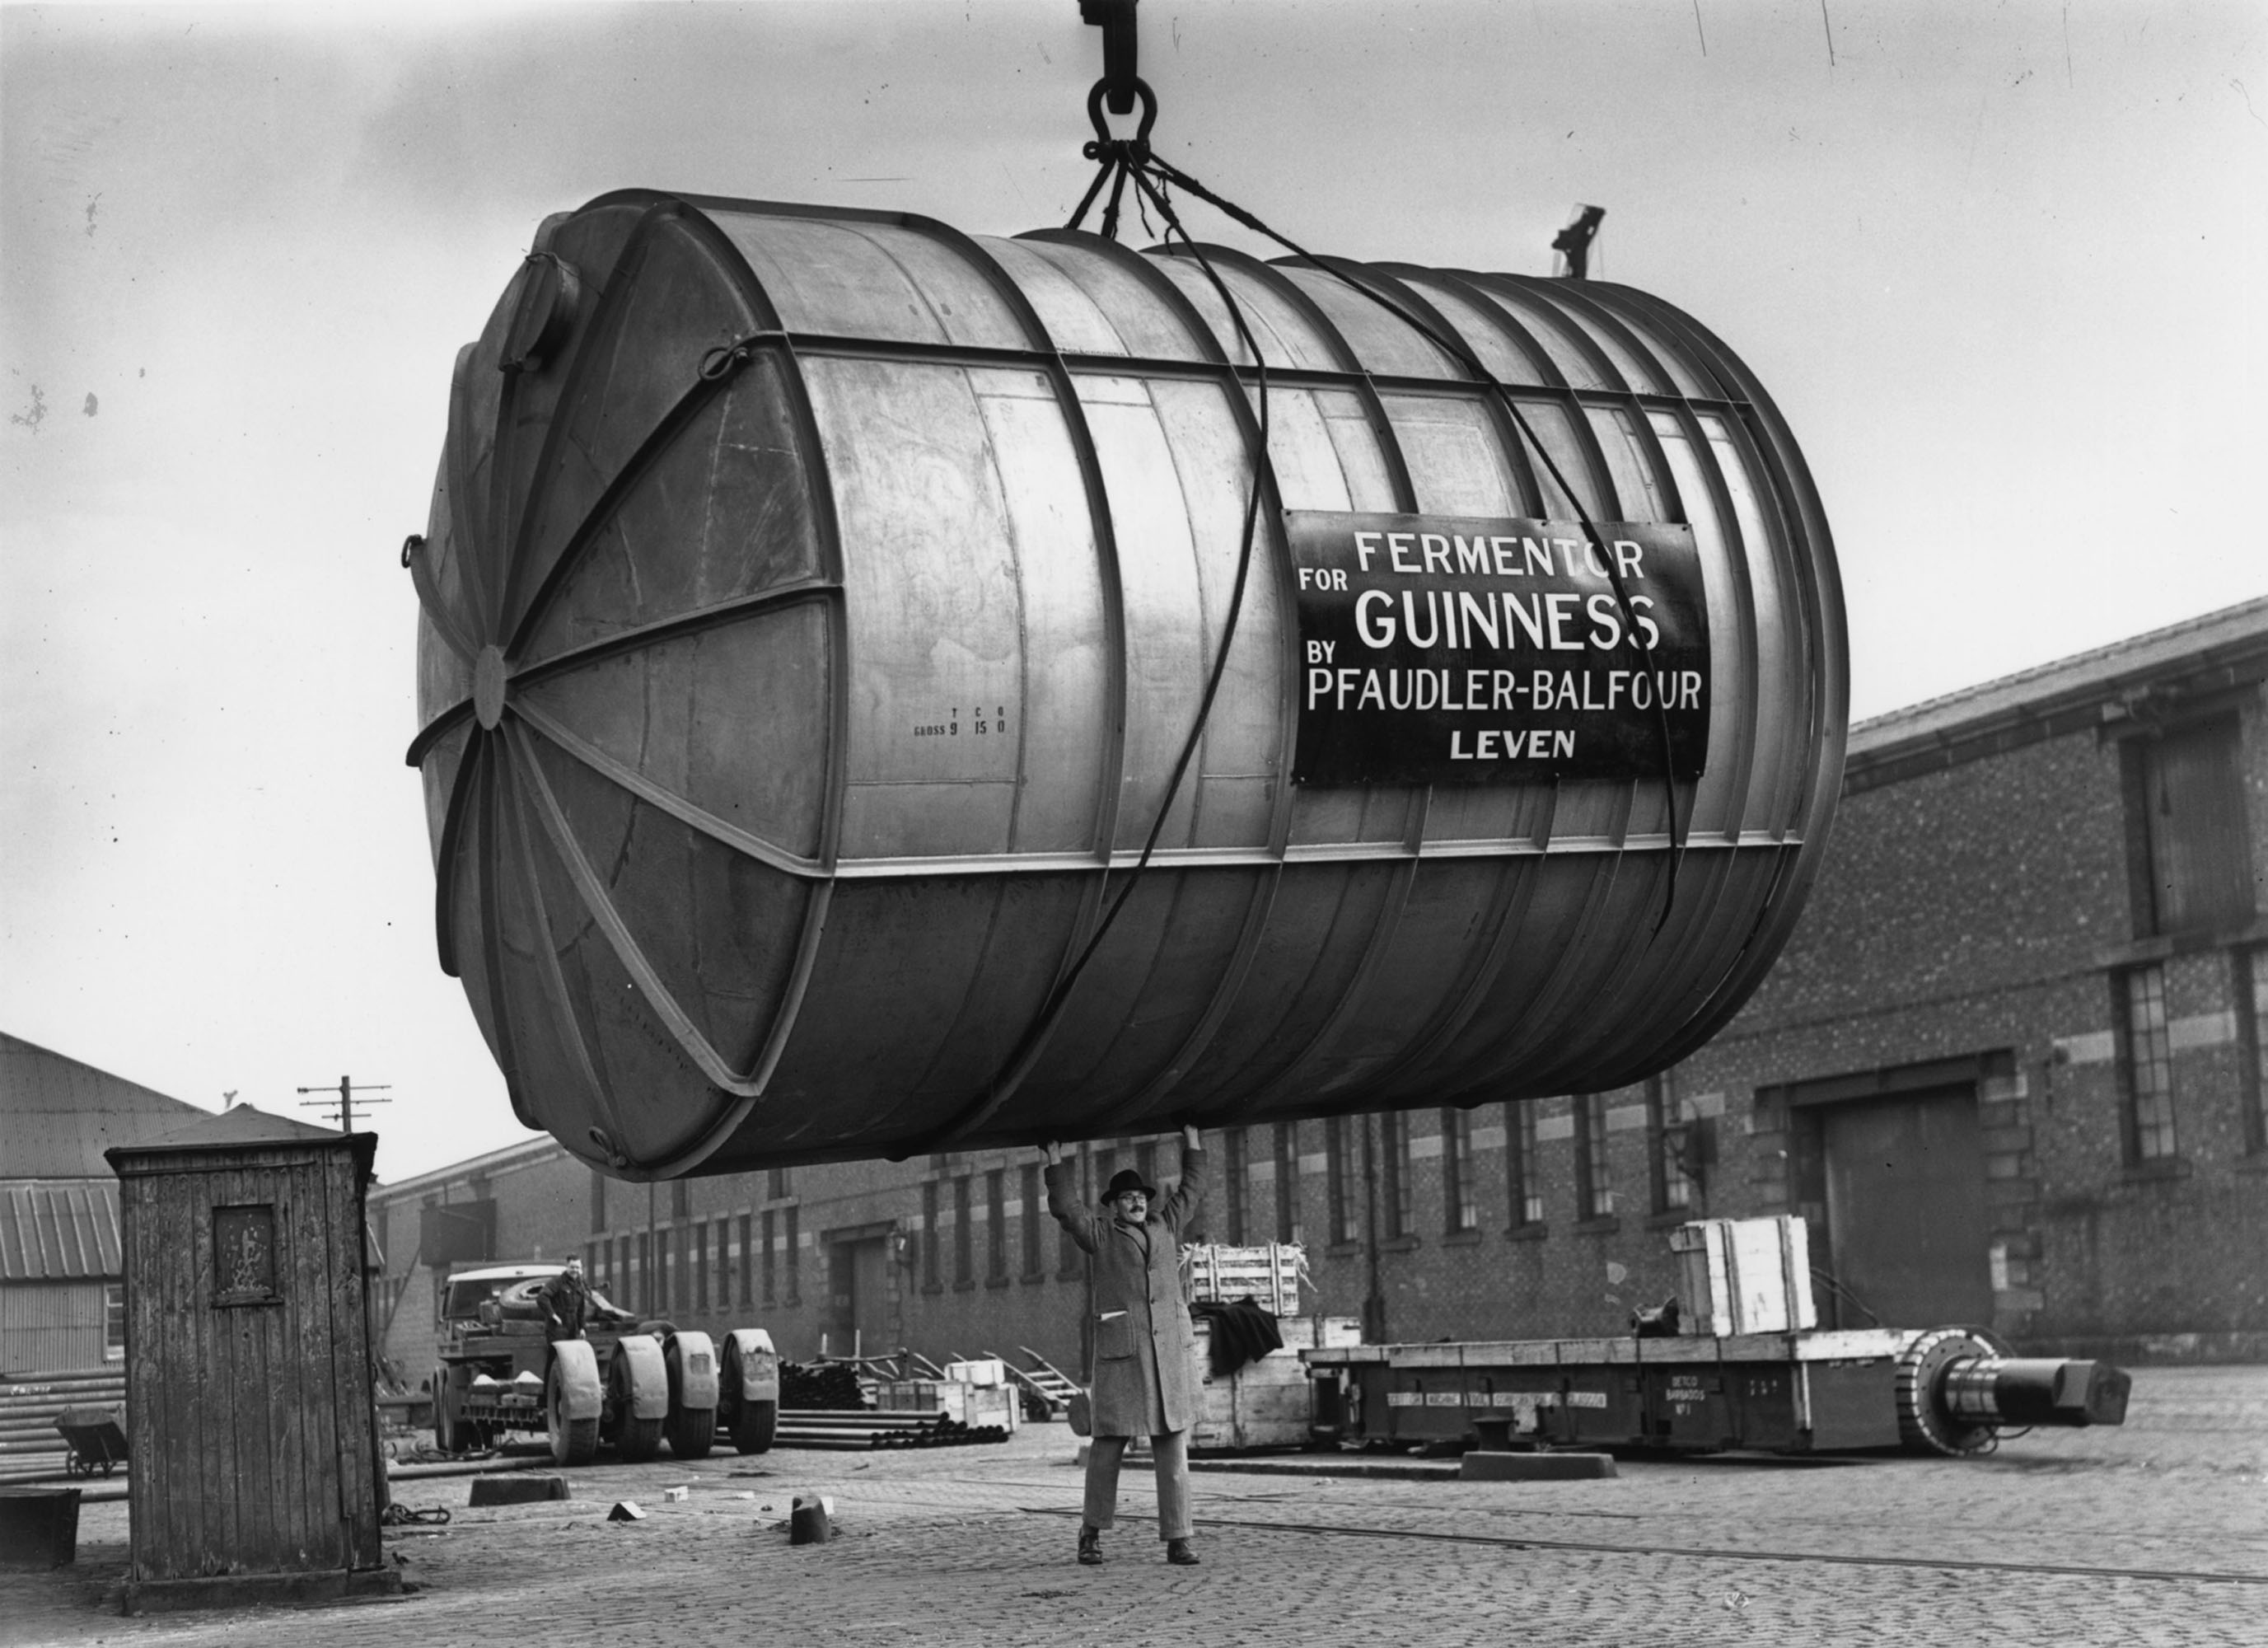 A man guides a 10-ton stainless steel fermenting tun, constructed in Glasgow onto a ship en route to the Guinness Brewery in Dublin, 1949.